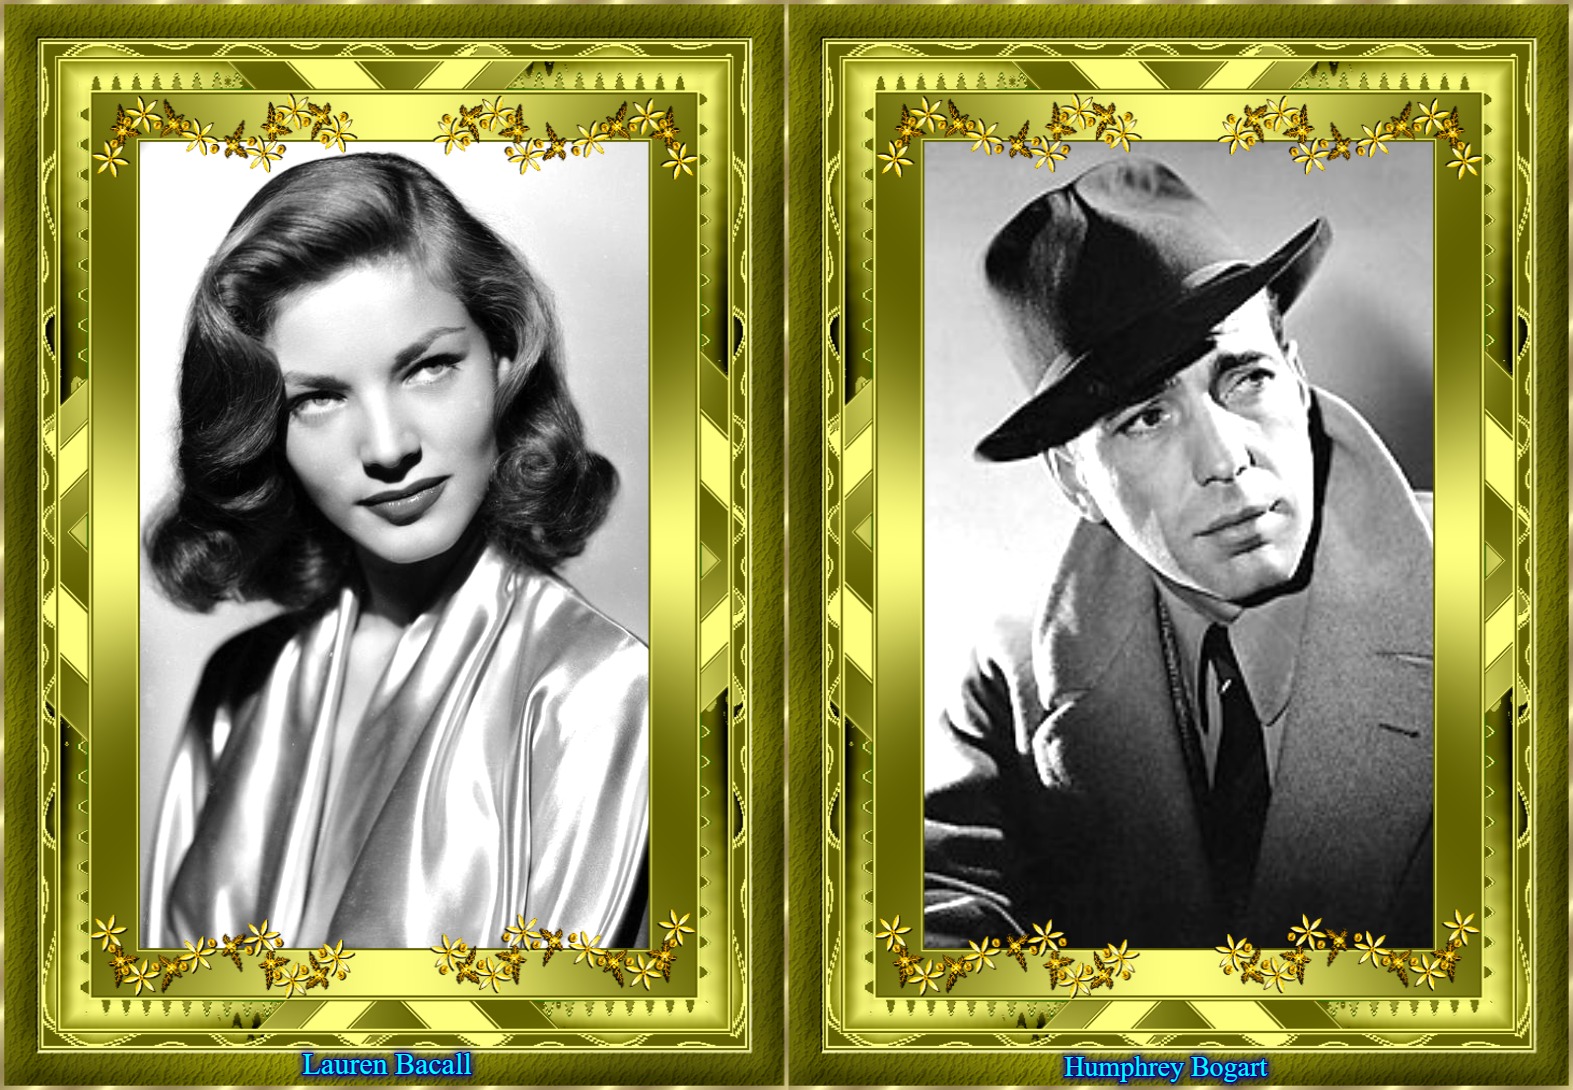 You are currently viewing “Lauren Bacall-The Sultry Hollywood Diva”